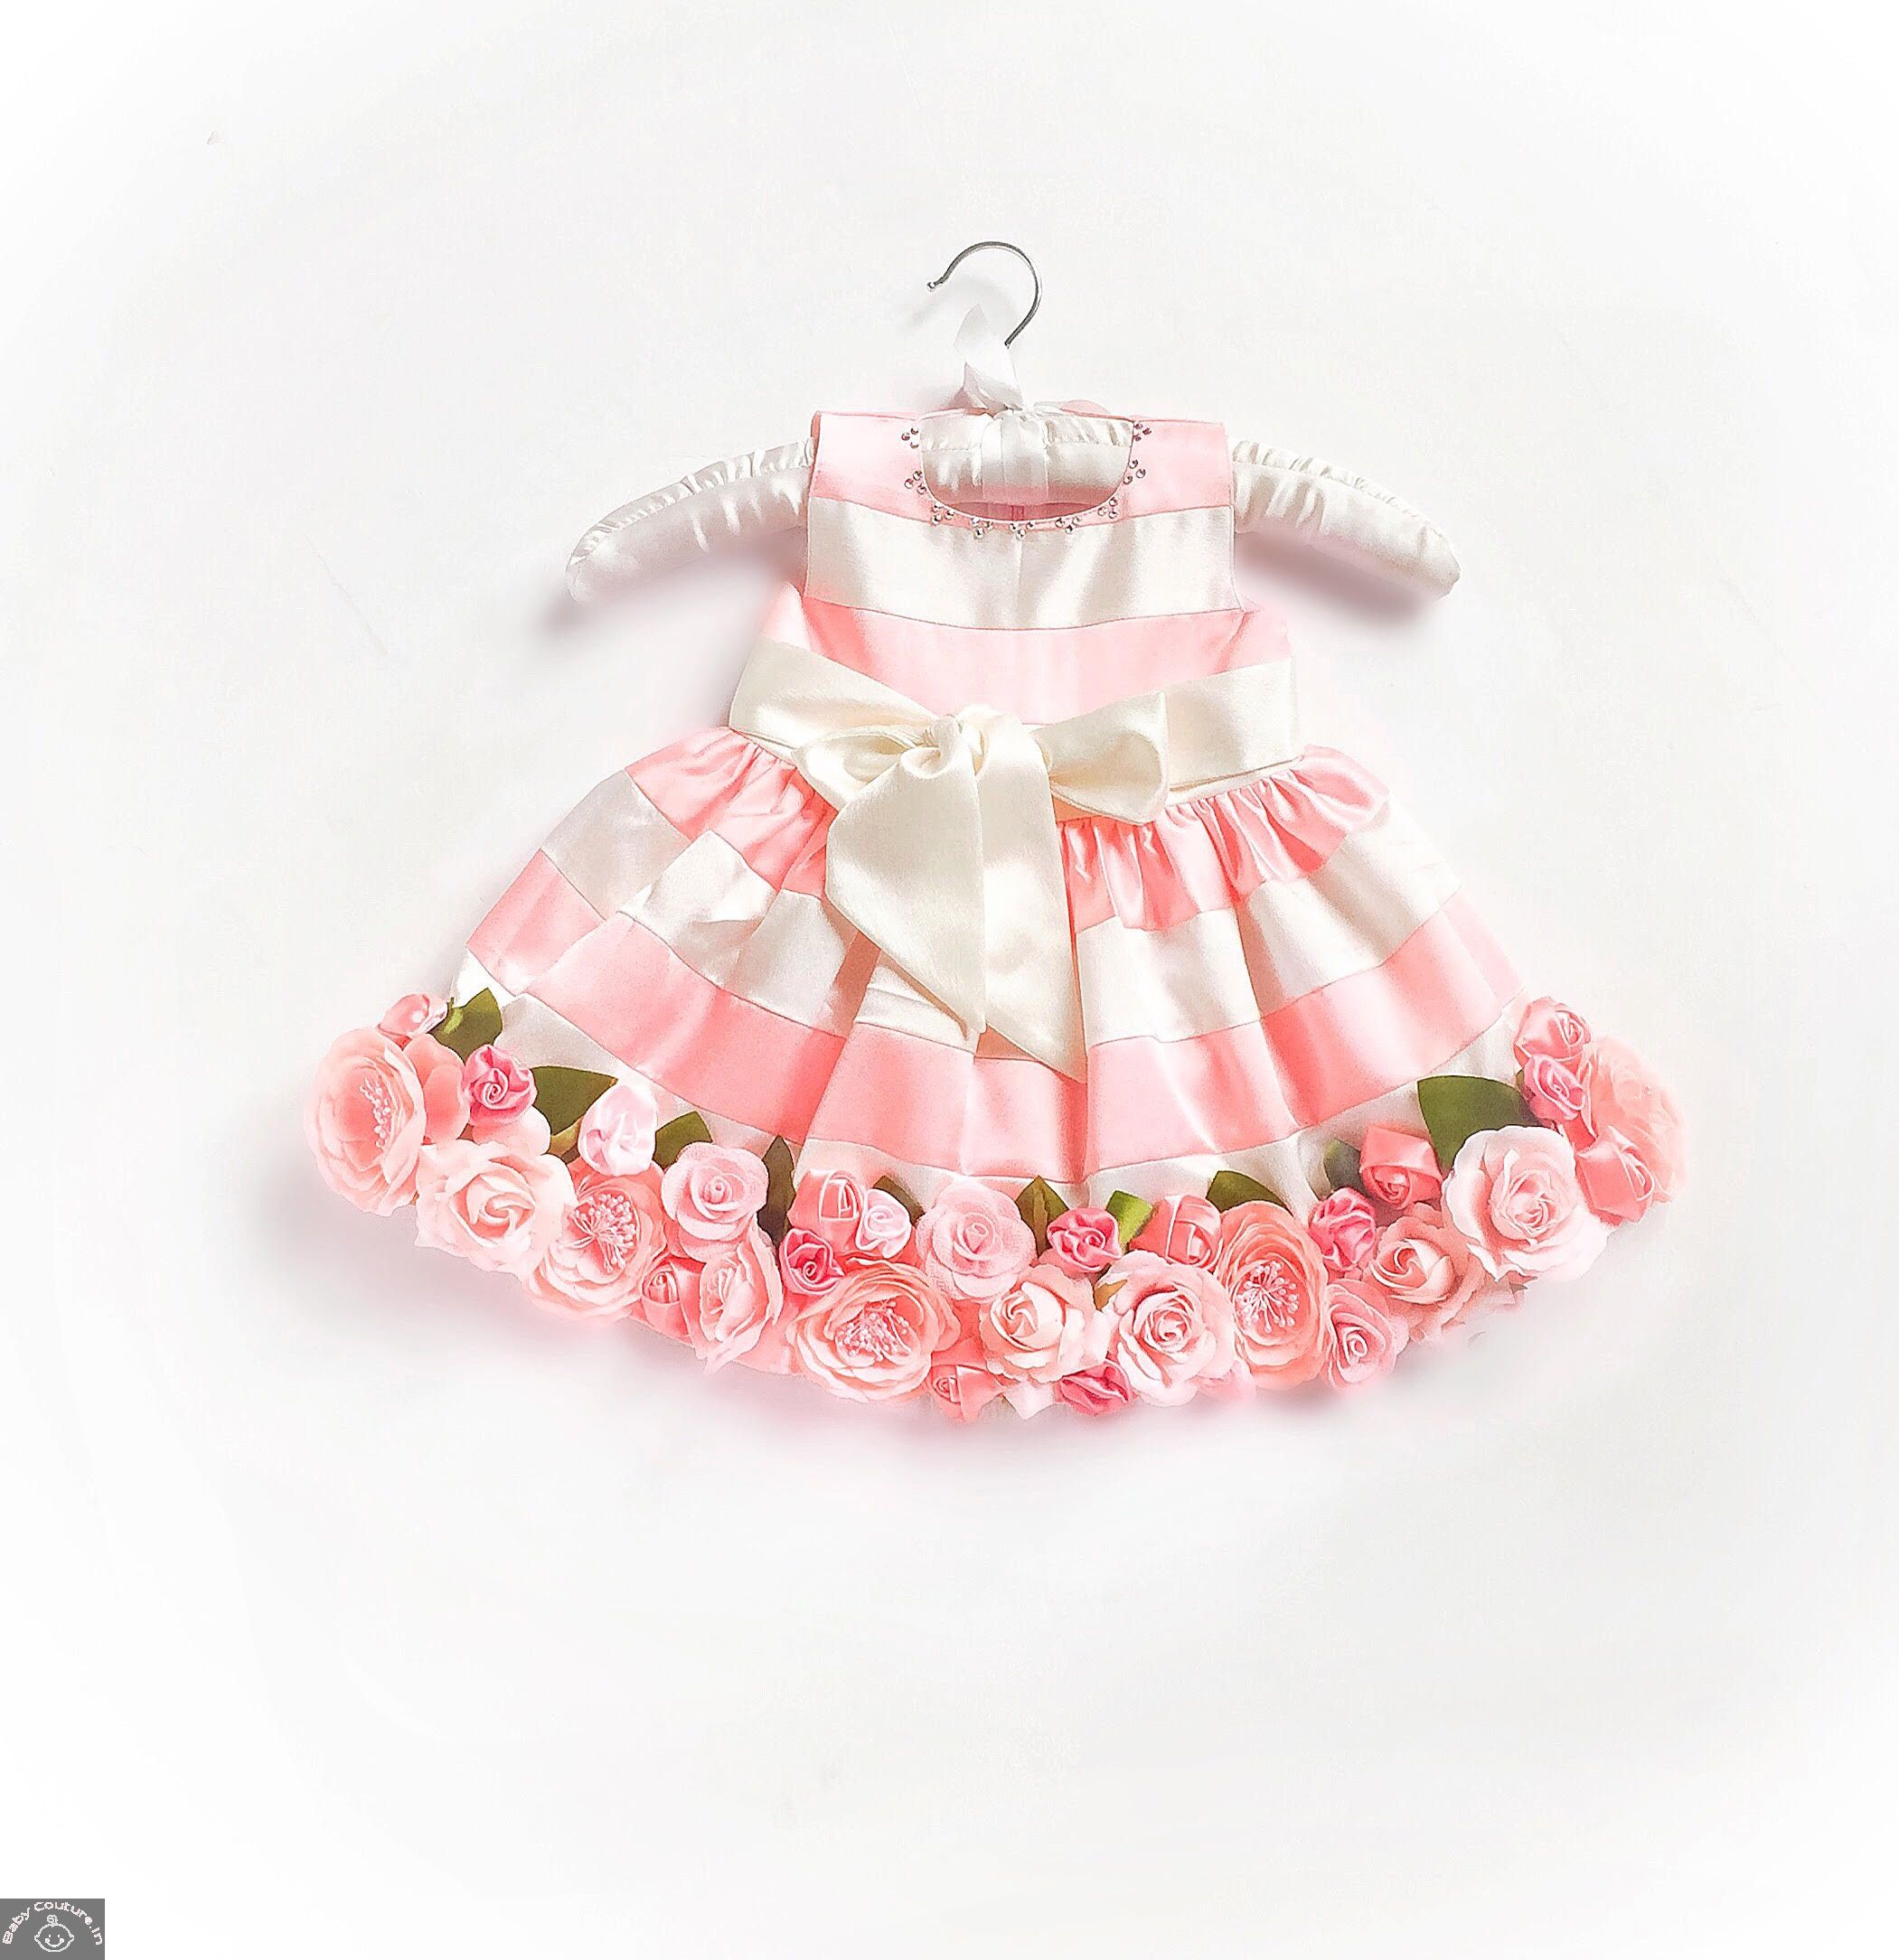 baby frocks party wear online, Dresses for girls, Floral Dresses for girls, Floral Dresses for Women, floral frocks, floral print dress with sleeves, floral print dresses for weddings, Girls floral dress online, online party dresses for girls